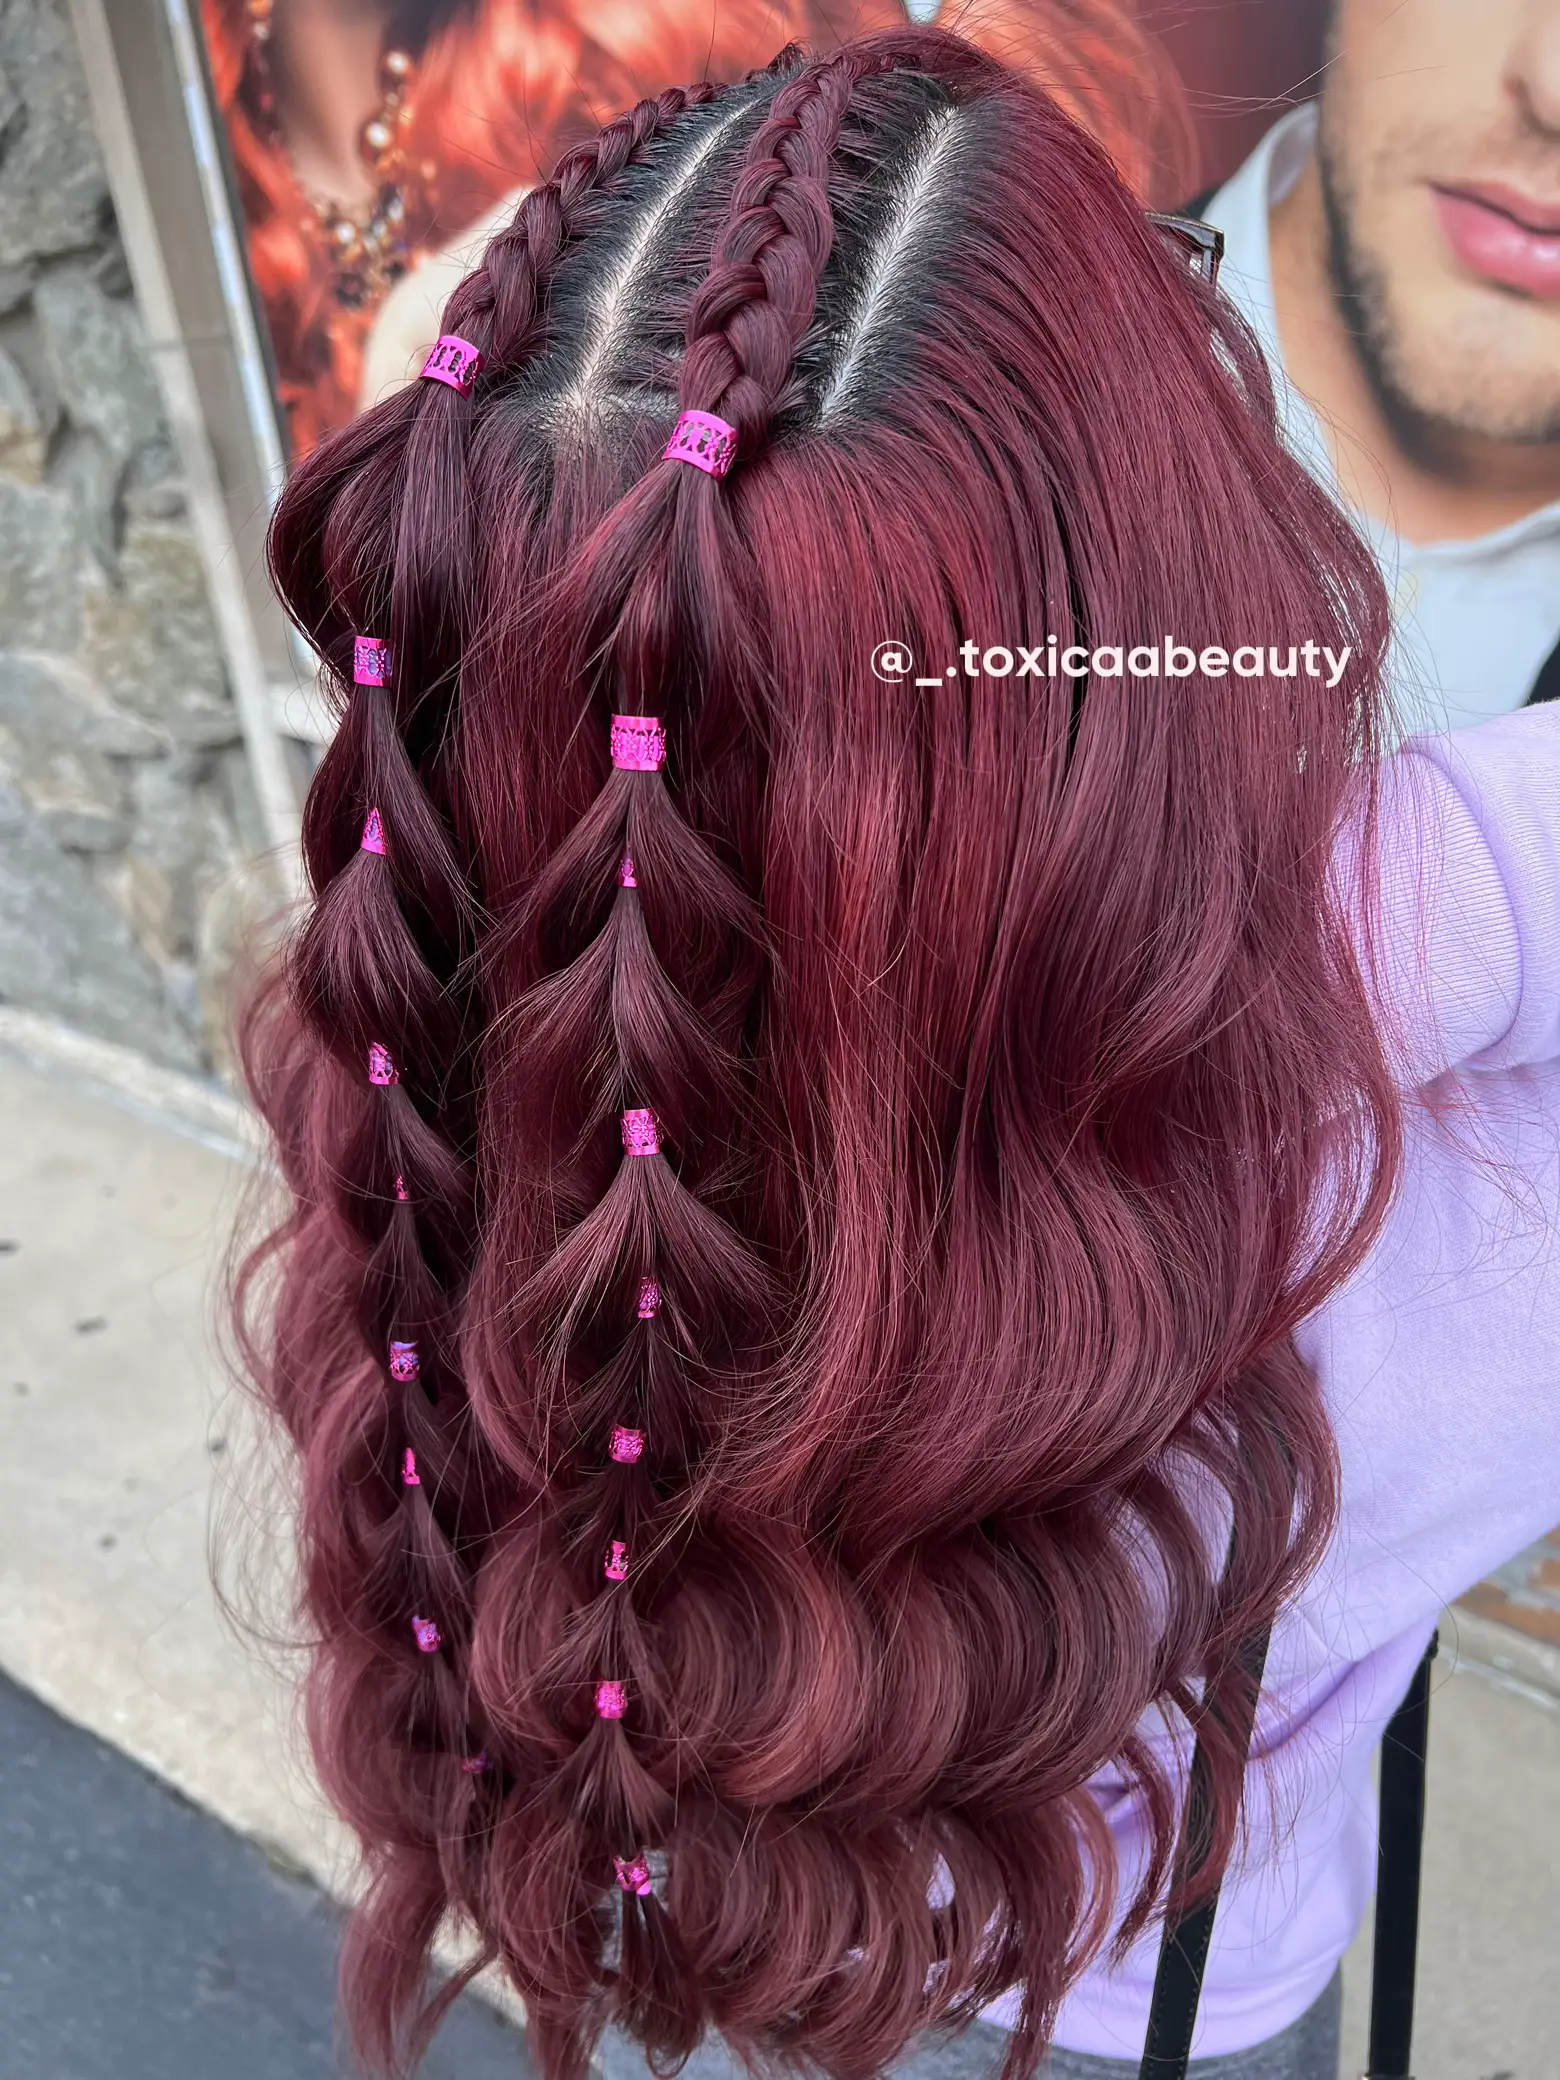 In case you're wondering what a 10lb braid looks like 💖 Via the